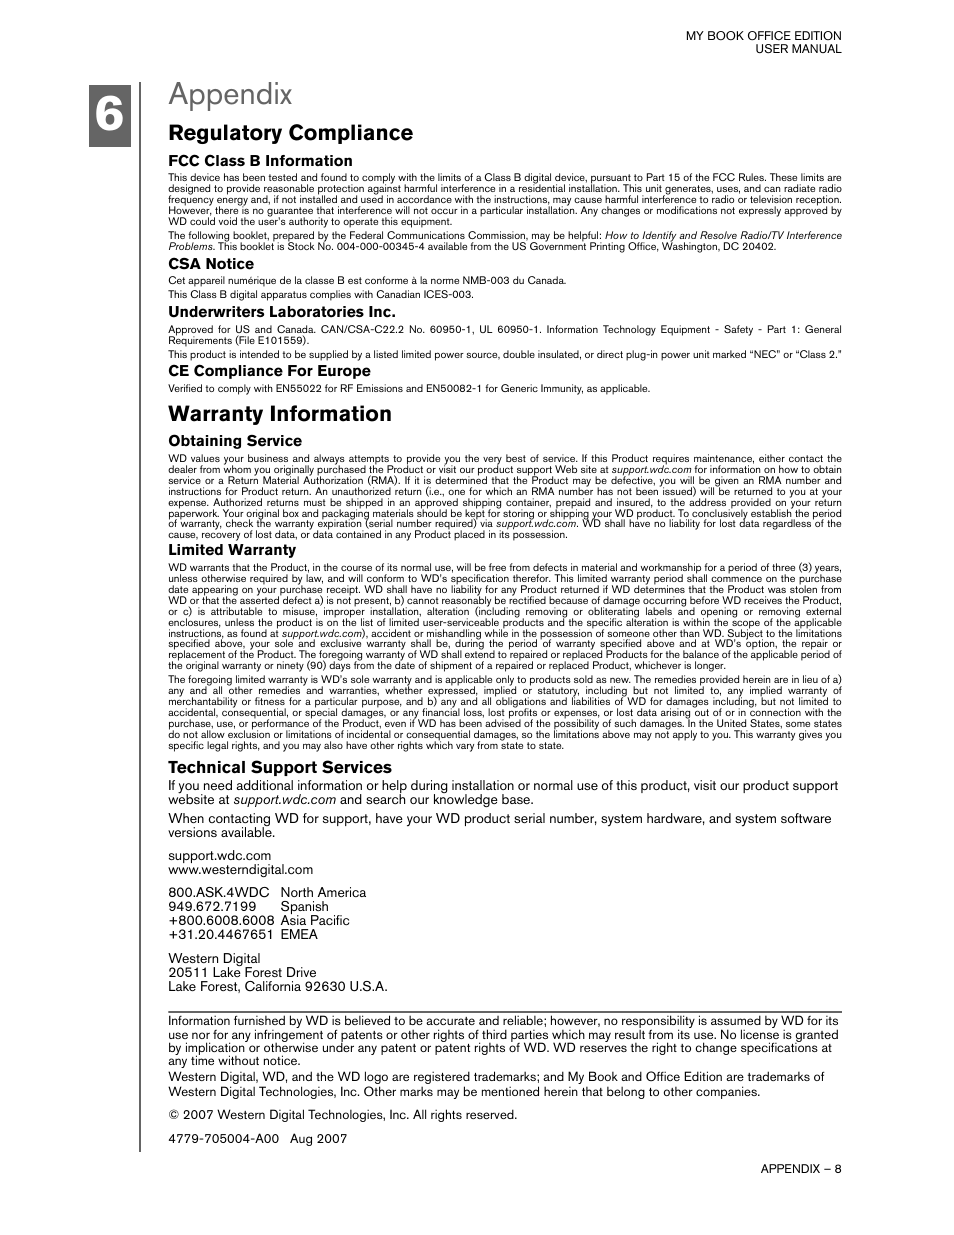 Appendix, Regulatory compliance, Fcc class b information | Csa notice, Underwriters laboratories inc, Ce compliance for europe, Warranty information, Obtaining service, Limited warranty, Technical support services | Western Digital 4779 705004 User Manual | Page 9 / 9